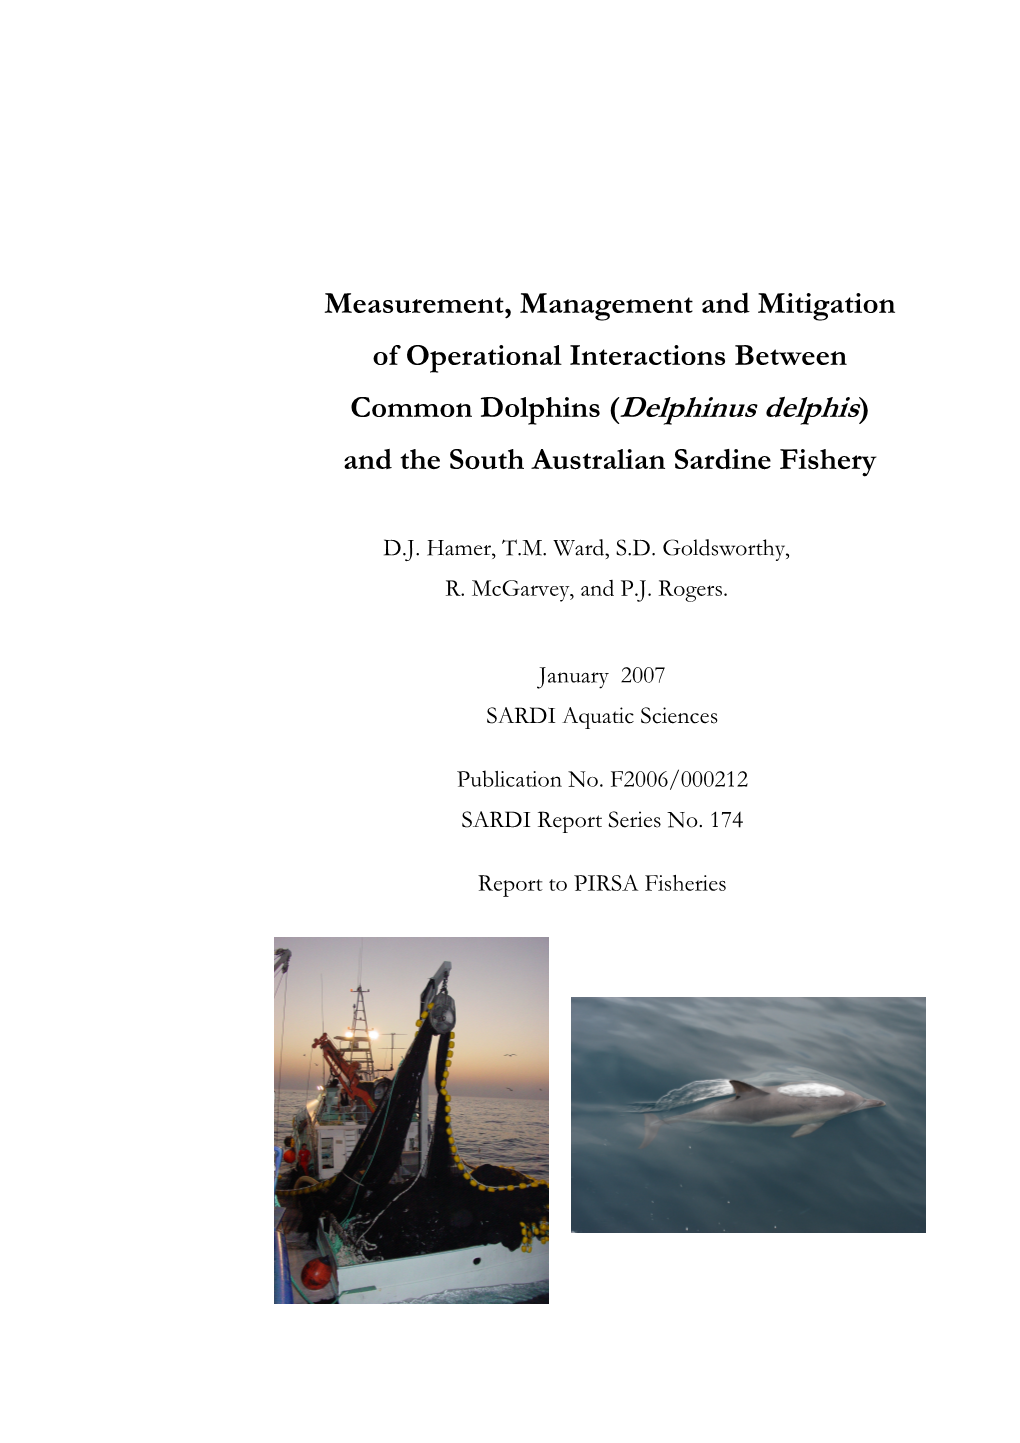 Measurement, Management and Mitigation of Operational Interactions Between Common Dolphins ( Delphinus Delphis ) and the South Australian Sardine Fishery